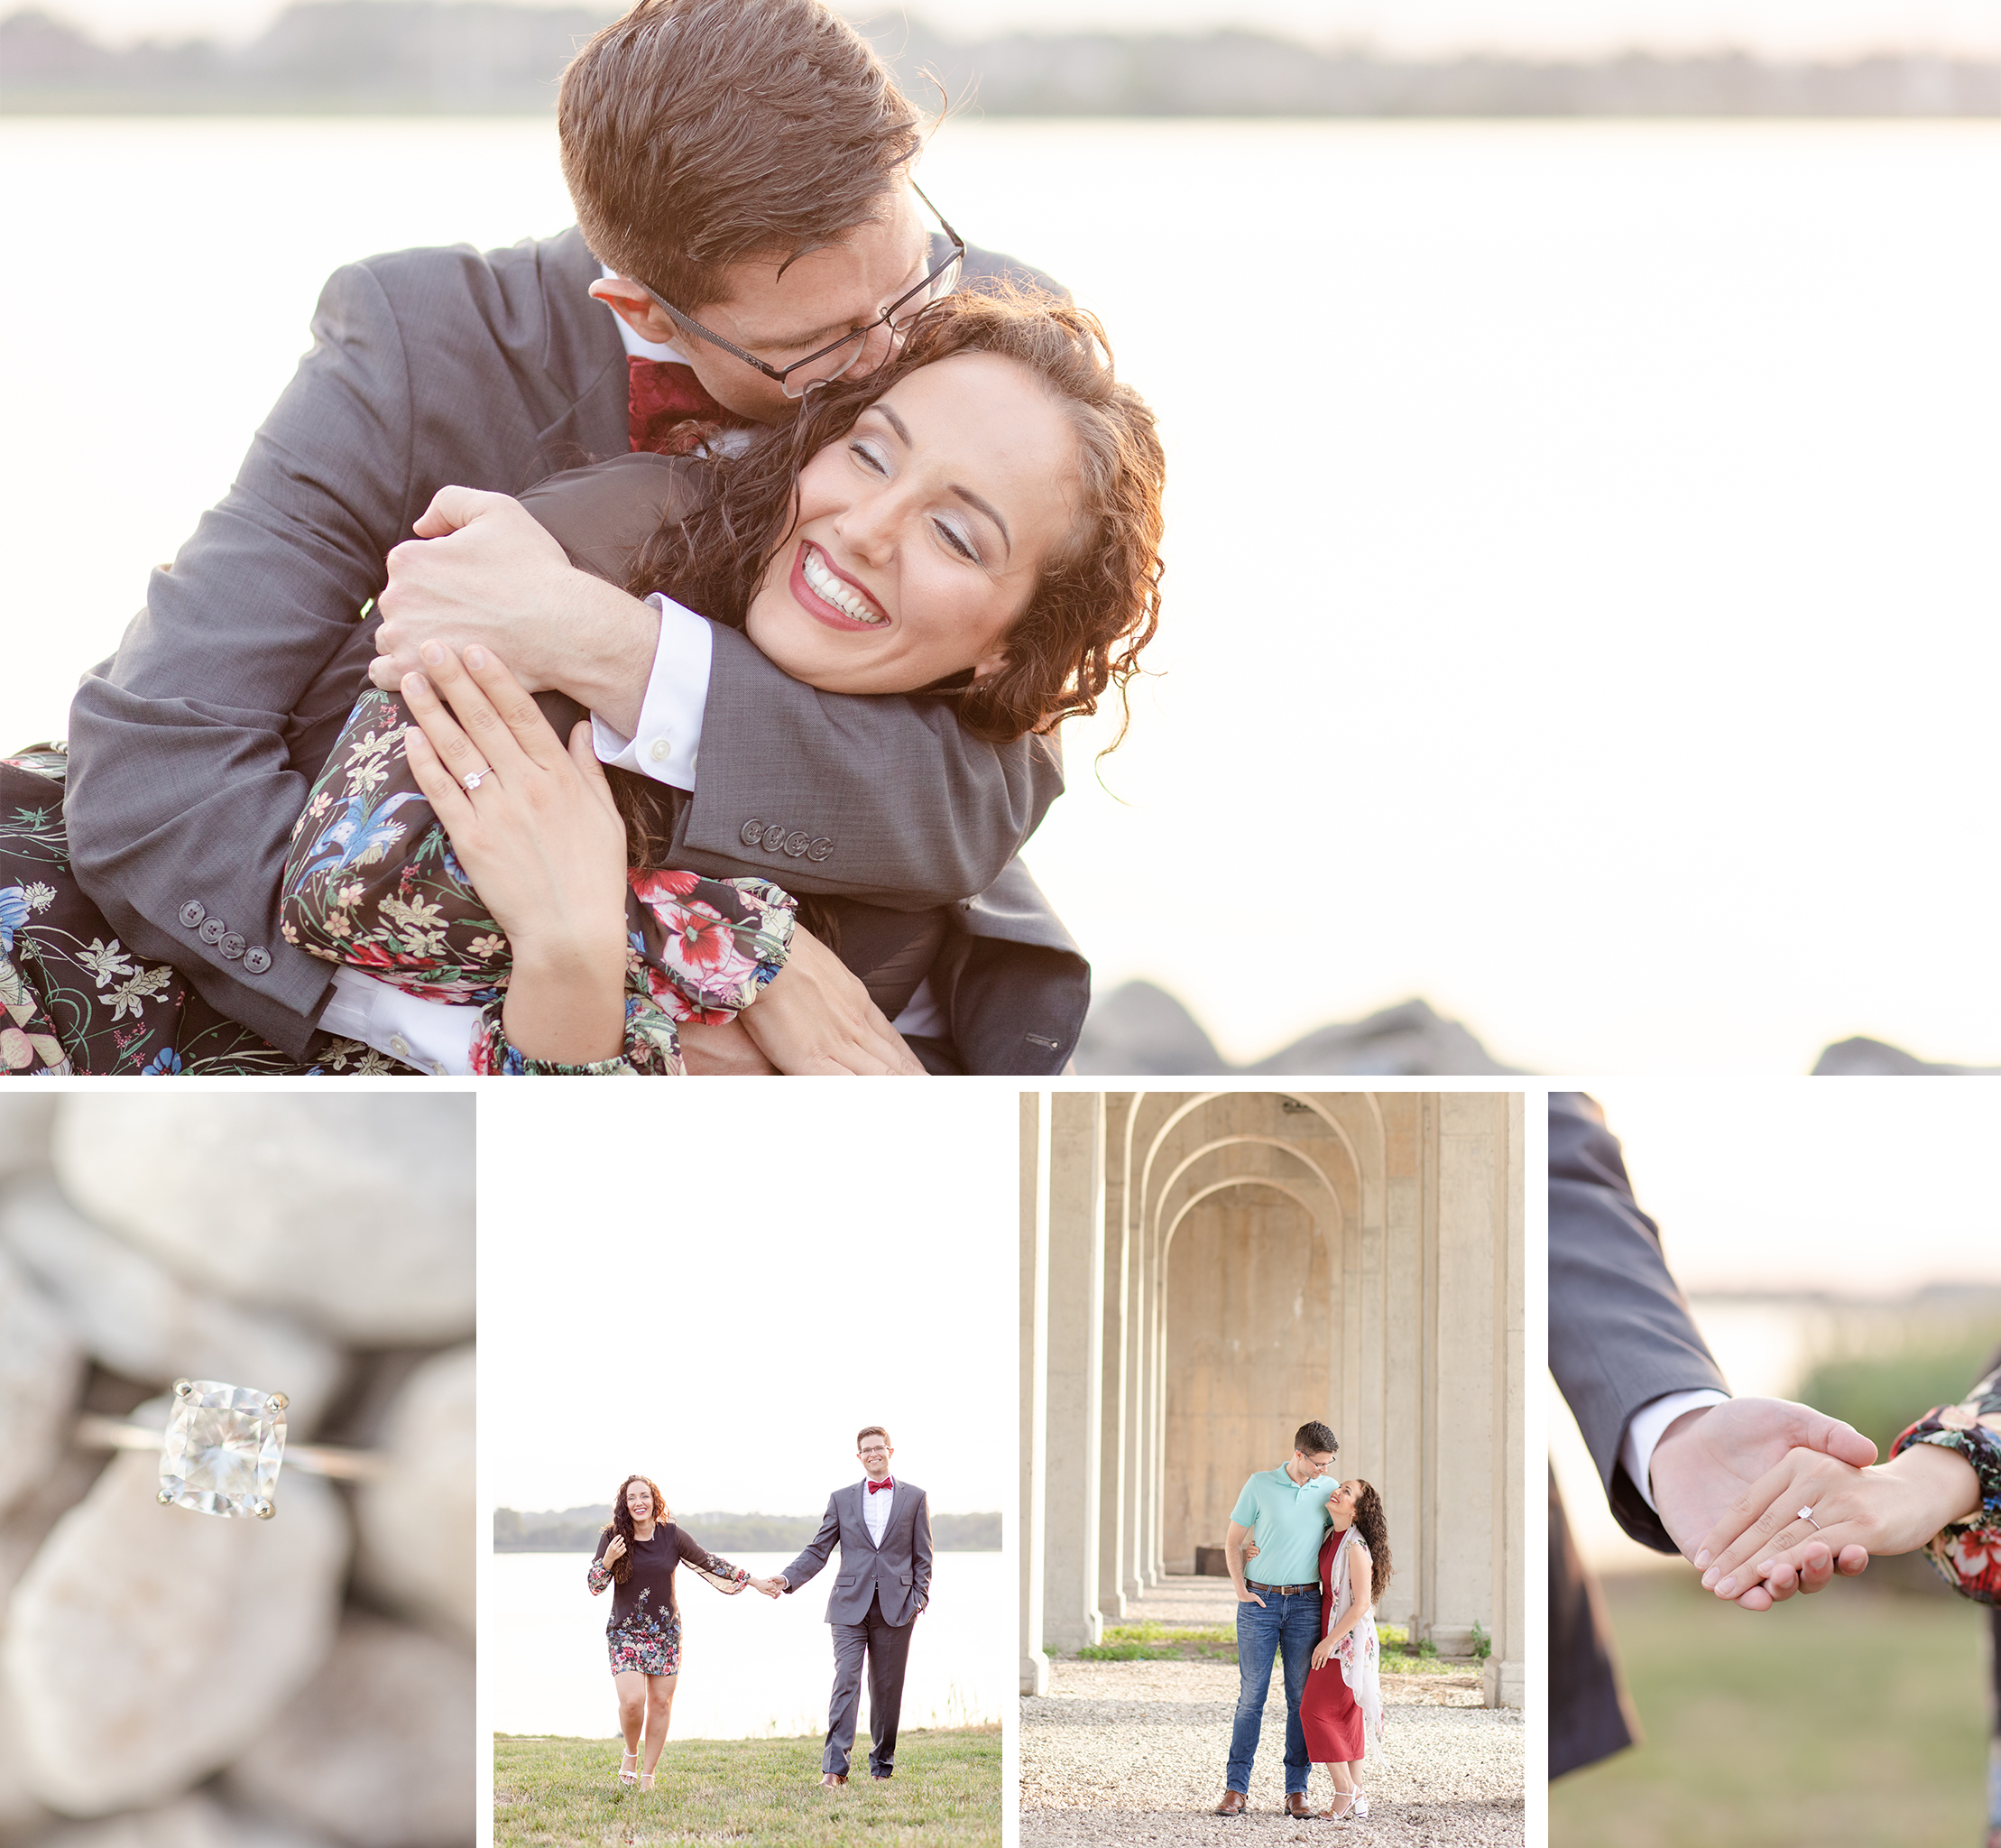 5 Image Collage of Couple at West Covington Park at